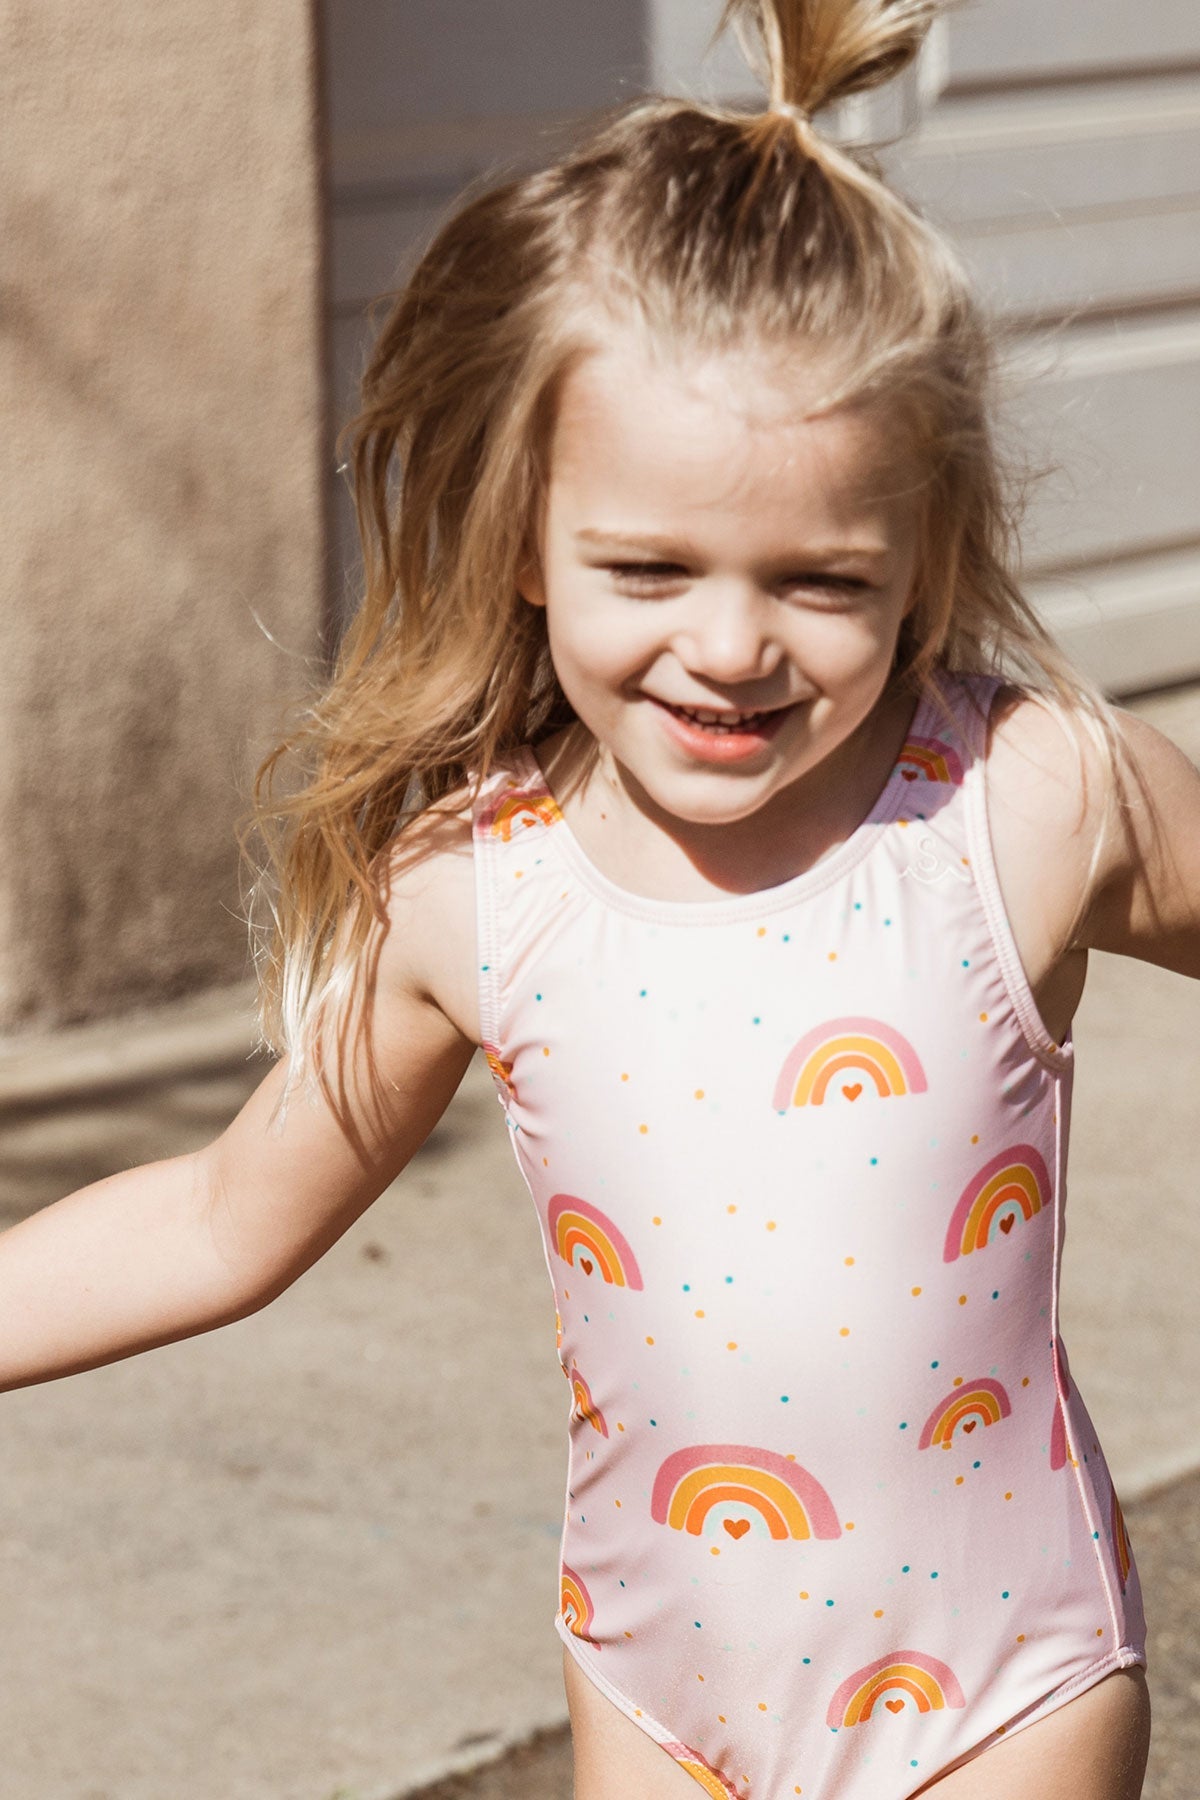 Custom rainbow print made exclusively for Seaesta Surf with a base color in a beautiful pastel pink. Seaesta Surf kids swimsuits are earth and performance conscious, featuring eco-friendly fabrics and a full coverage that stays in place while your little one plays.